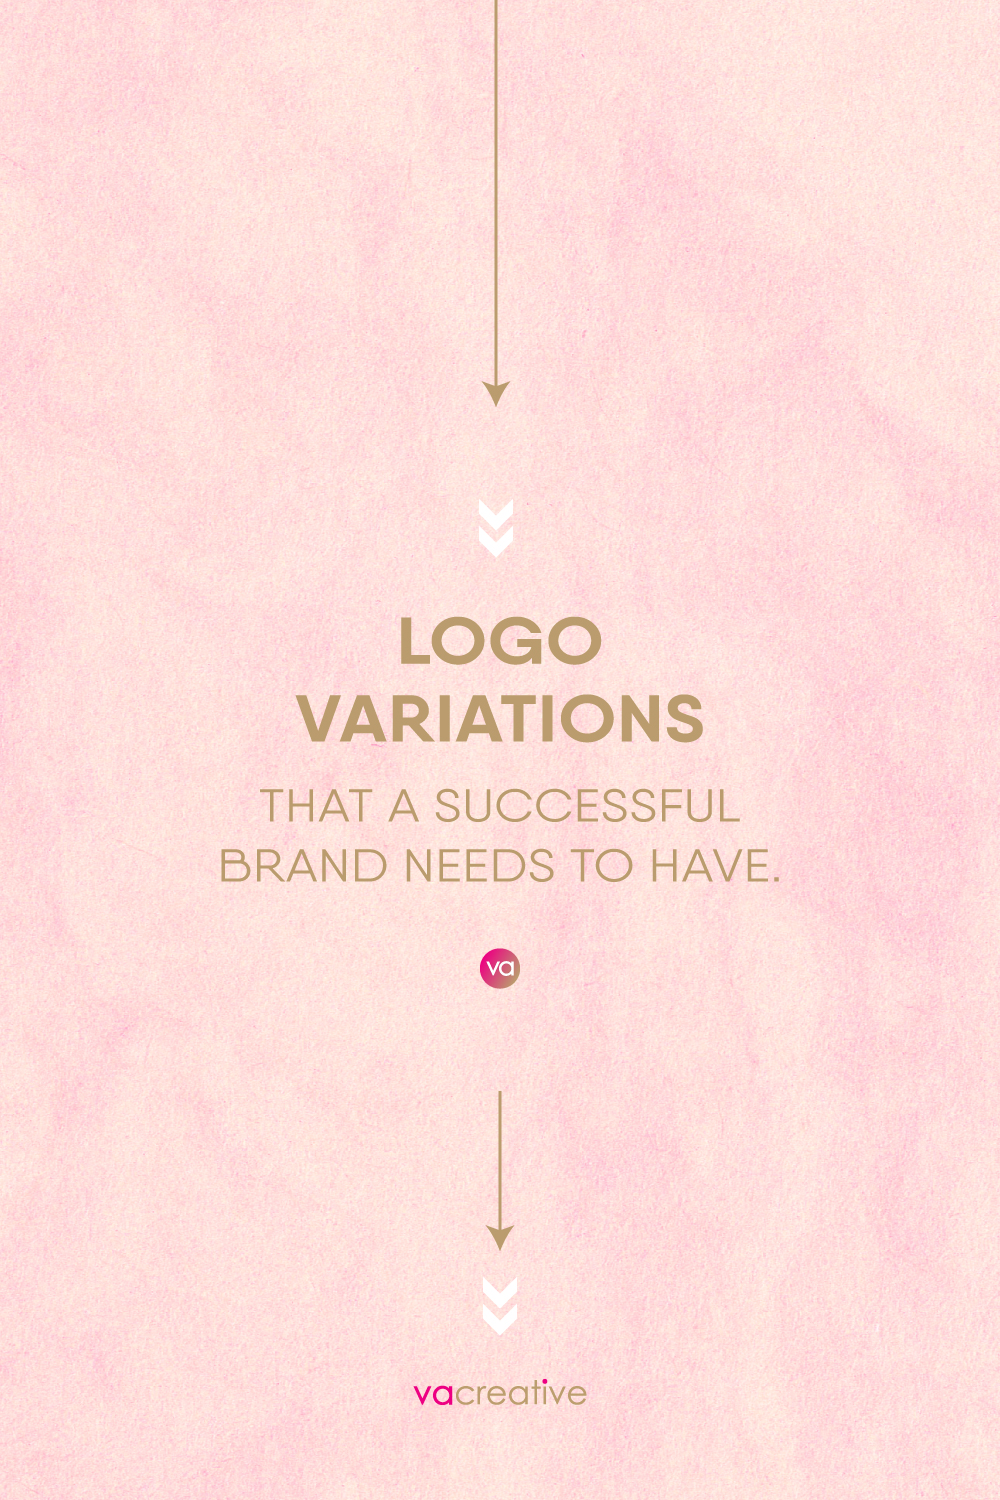 LOGO VARIATIONS THAT A SUCCESSFUL BRAND NEEDS TO HAVE